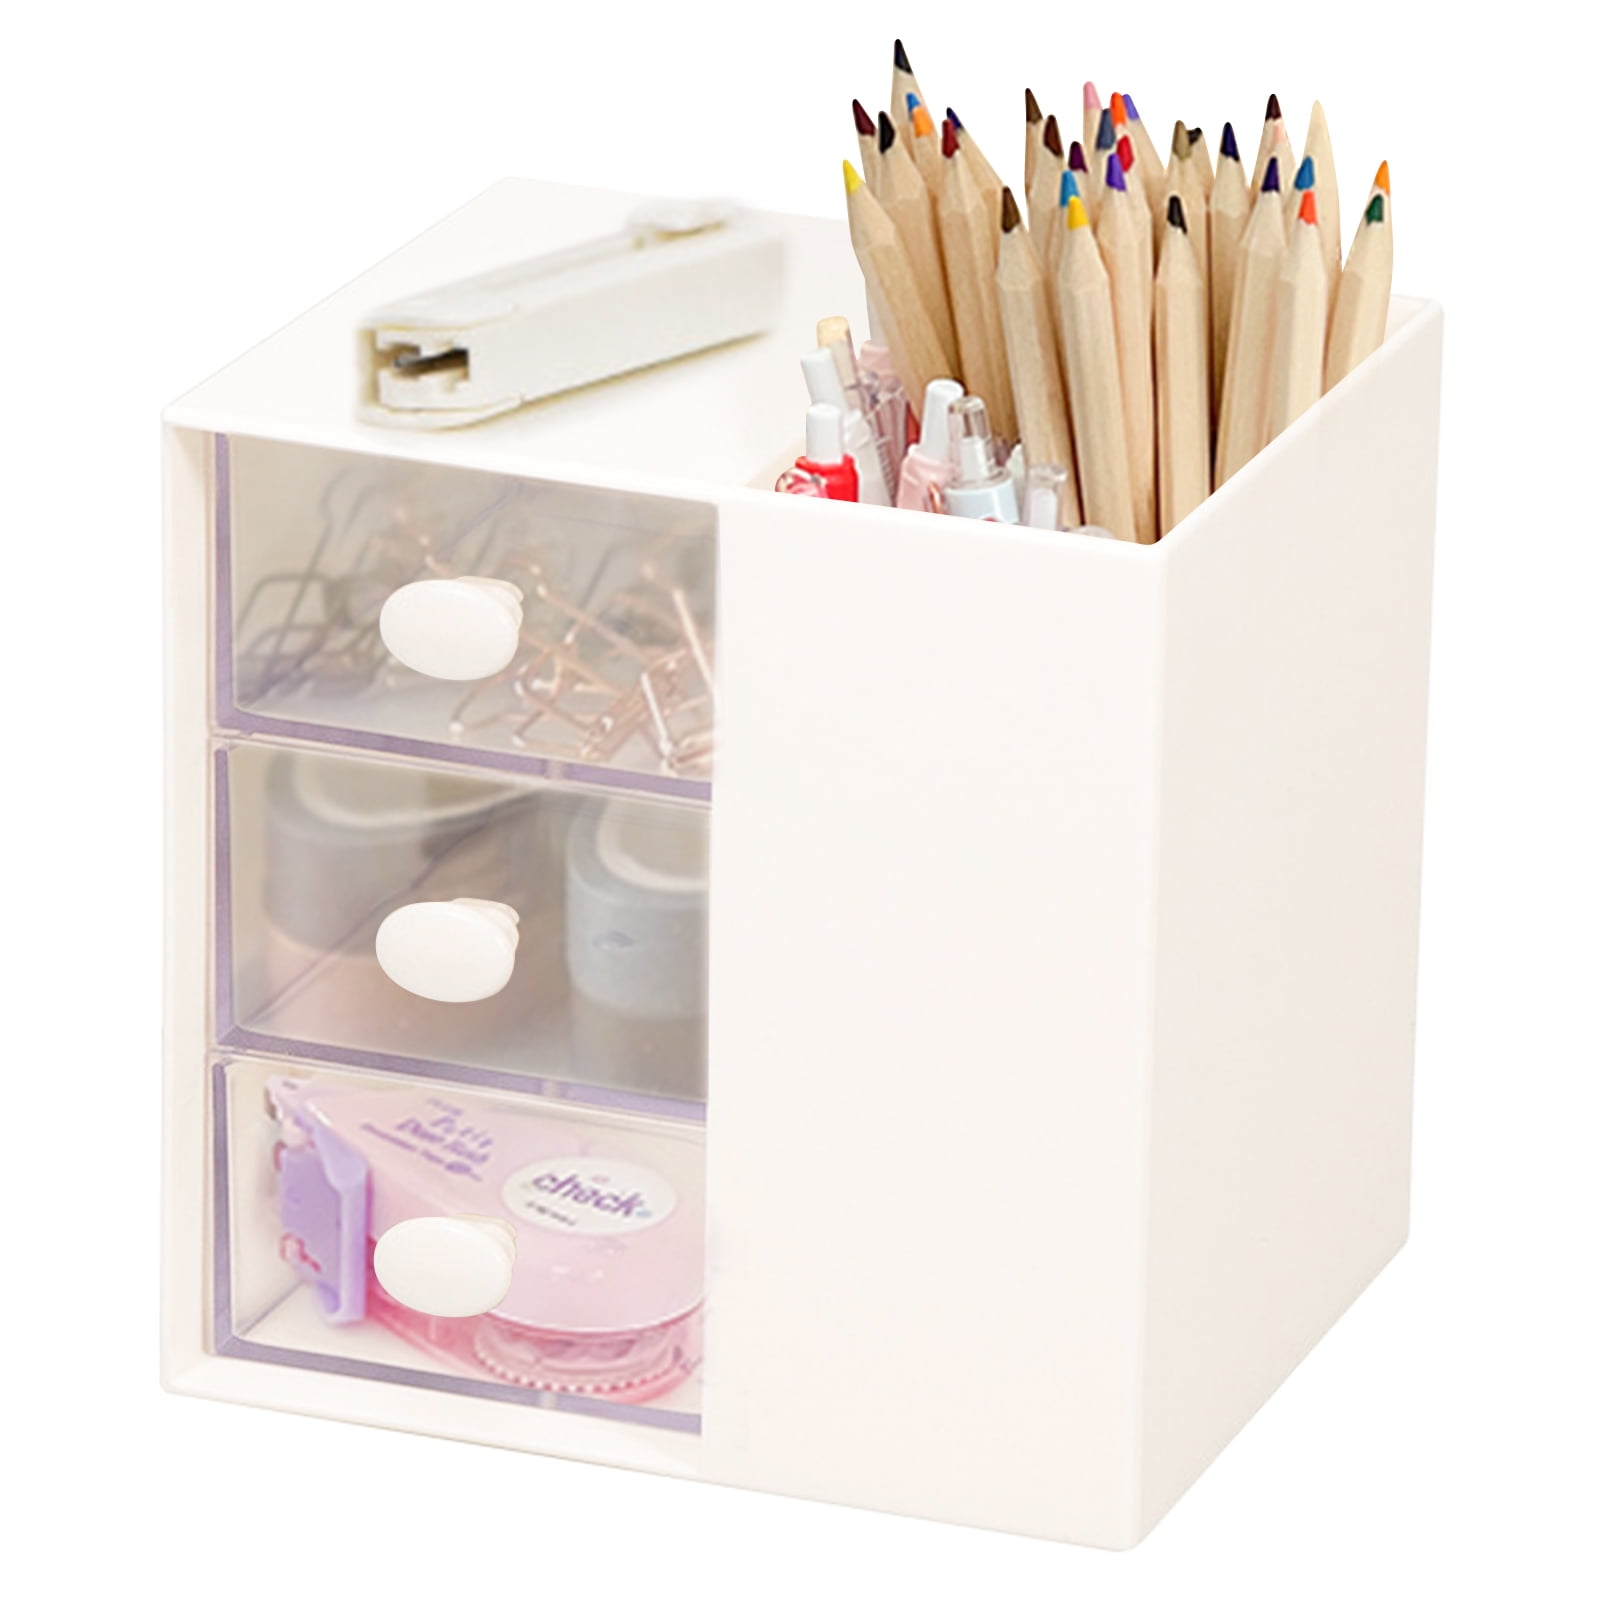 Marbrasse Pen Organizer with 2 Drawer, Multi-Functional Pencil Holder for  Desk, Desk Organizers and Accessories with 5 Compartments + Drawer for  Office Art Supplies (White)